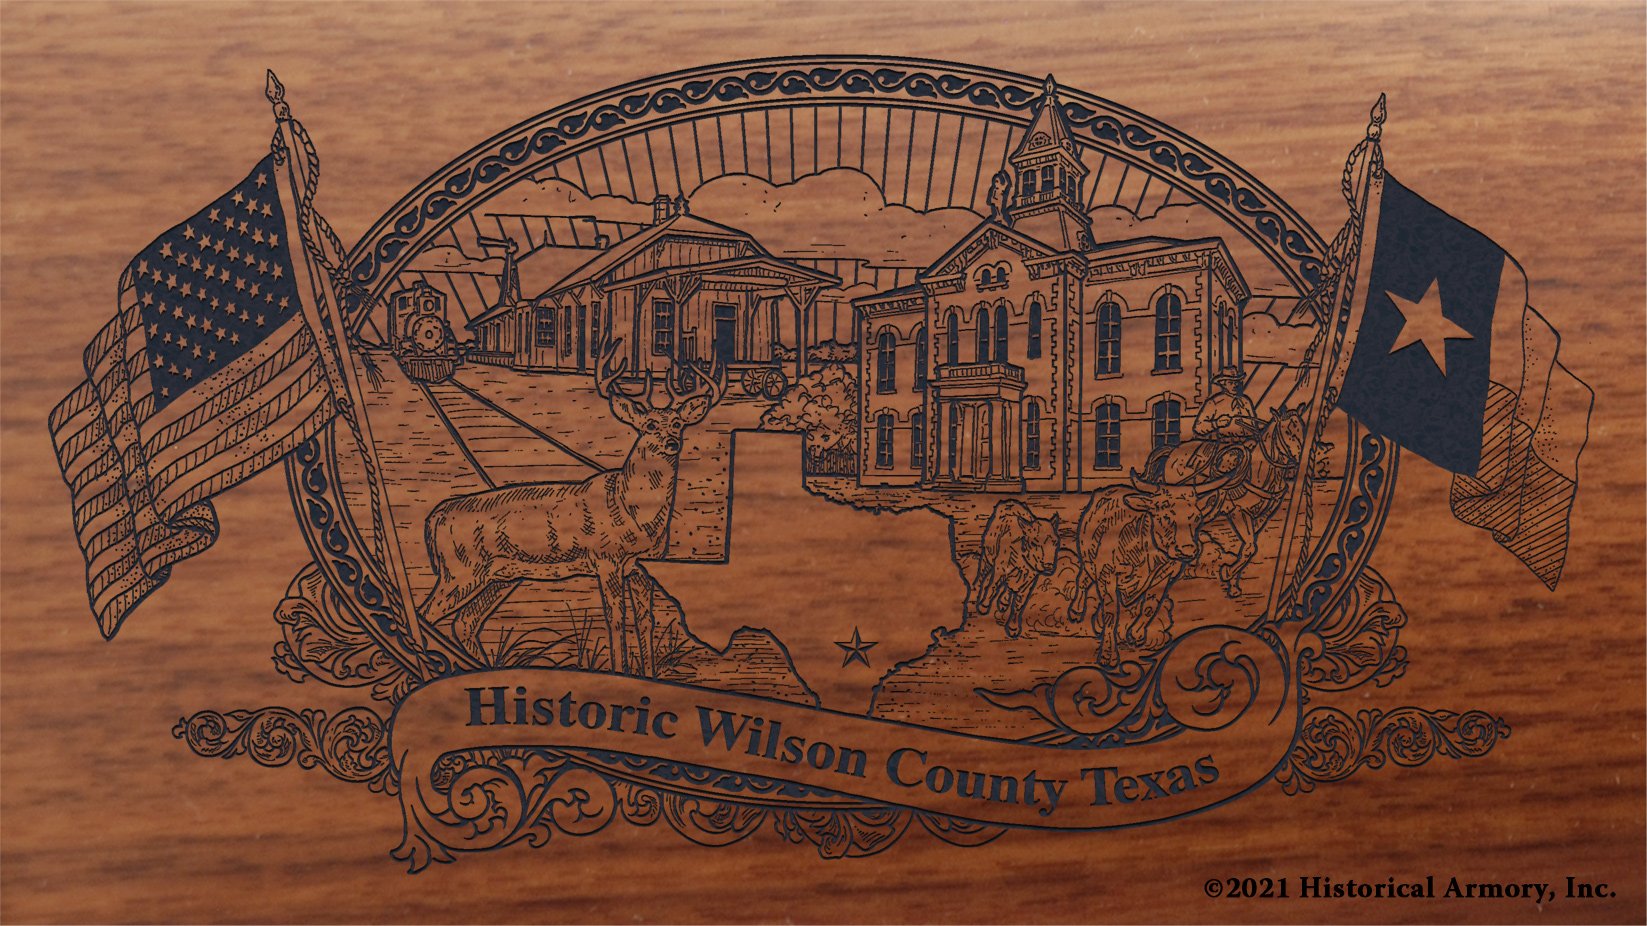 Engraved artwork | History of Wilson County Texas | Historical Armory